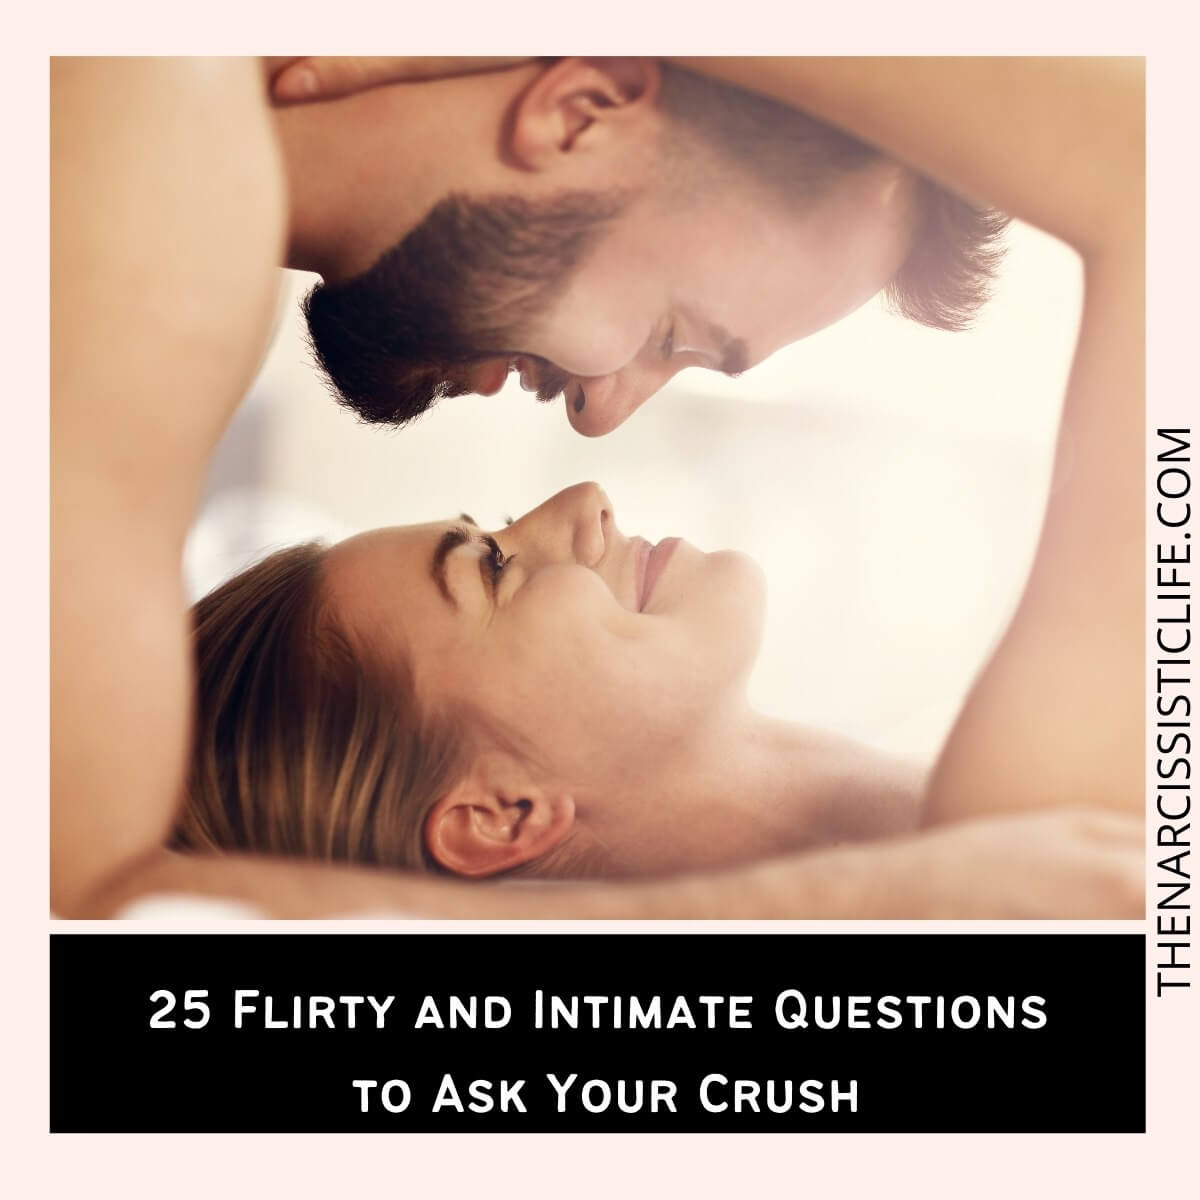 246 Really Flirty Questions To Ask Your Crush pic